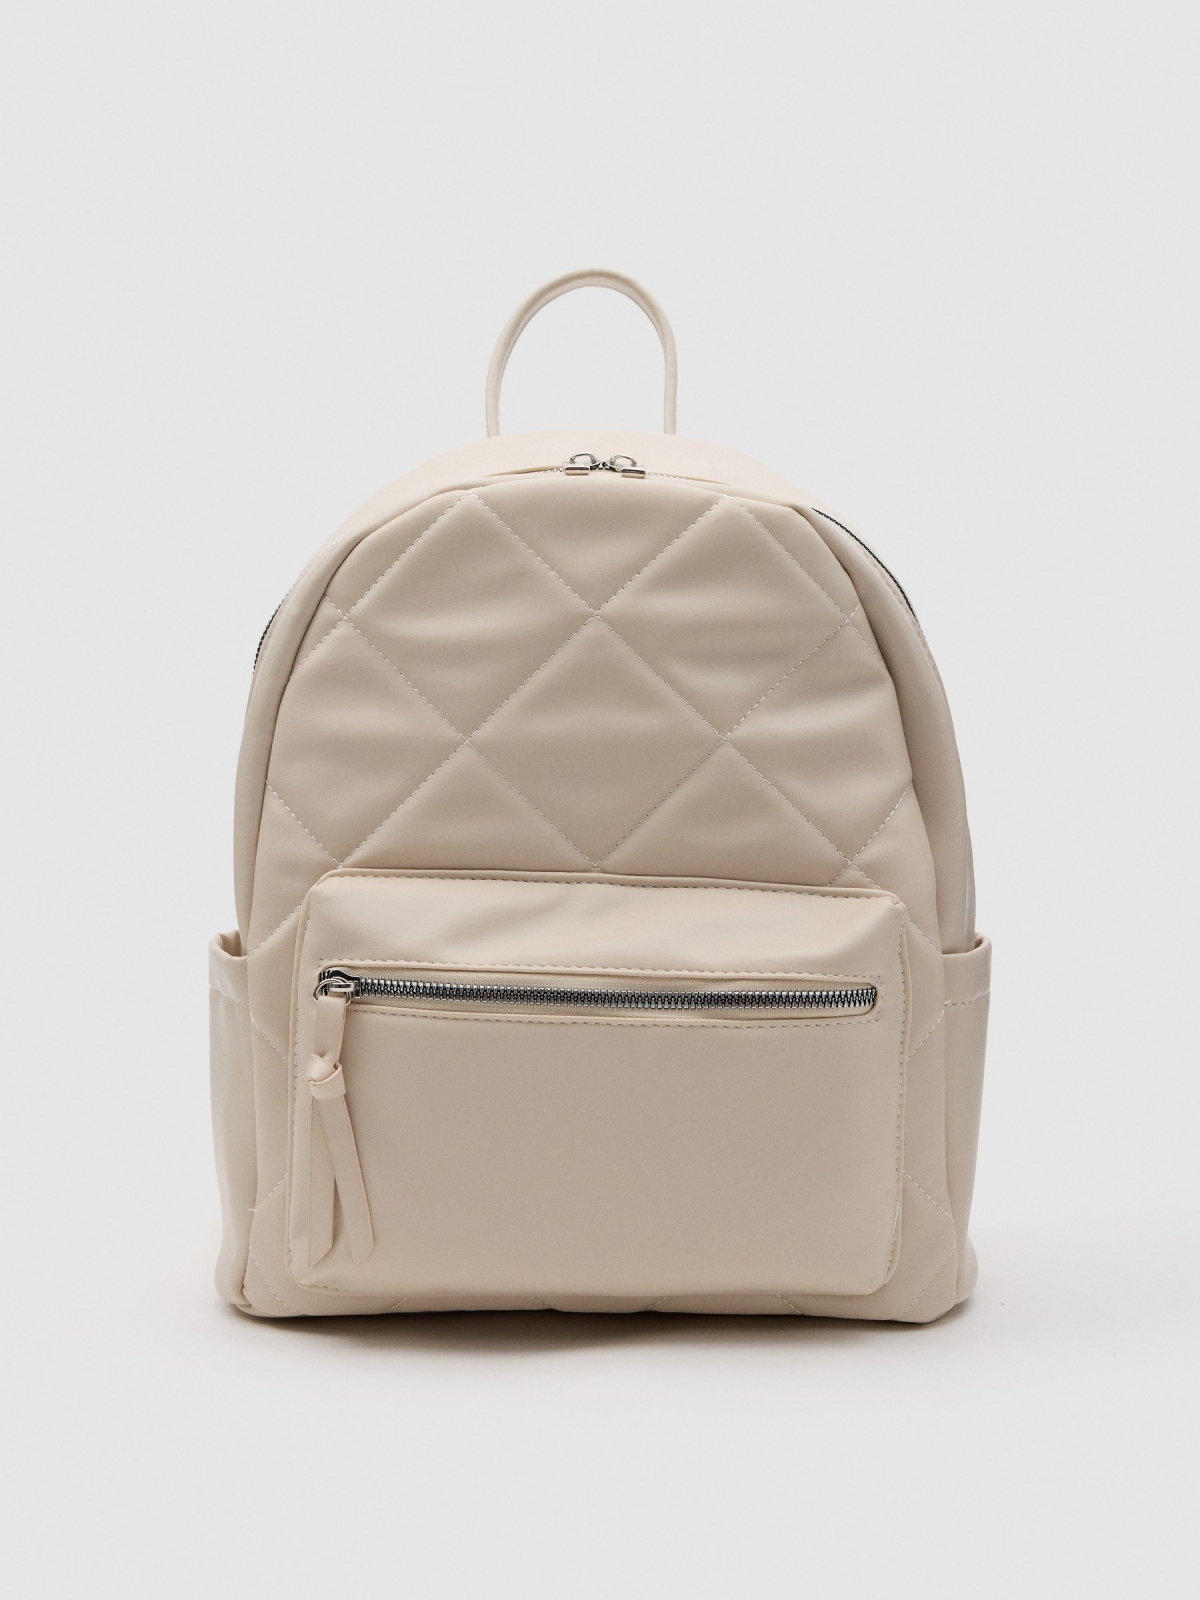 Leatherette backpack white